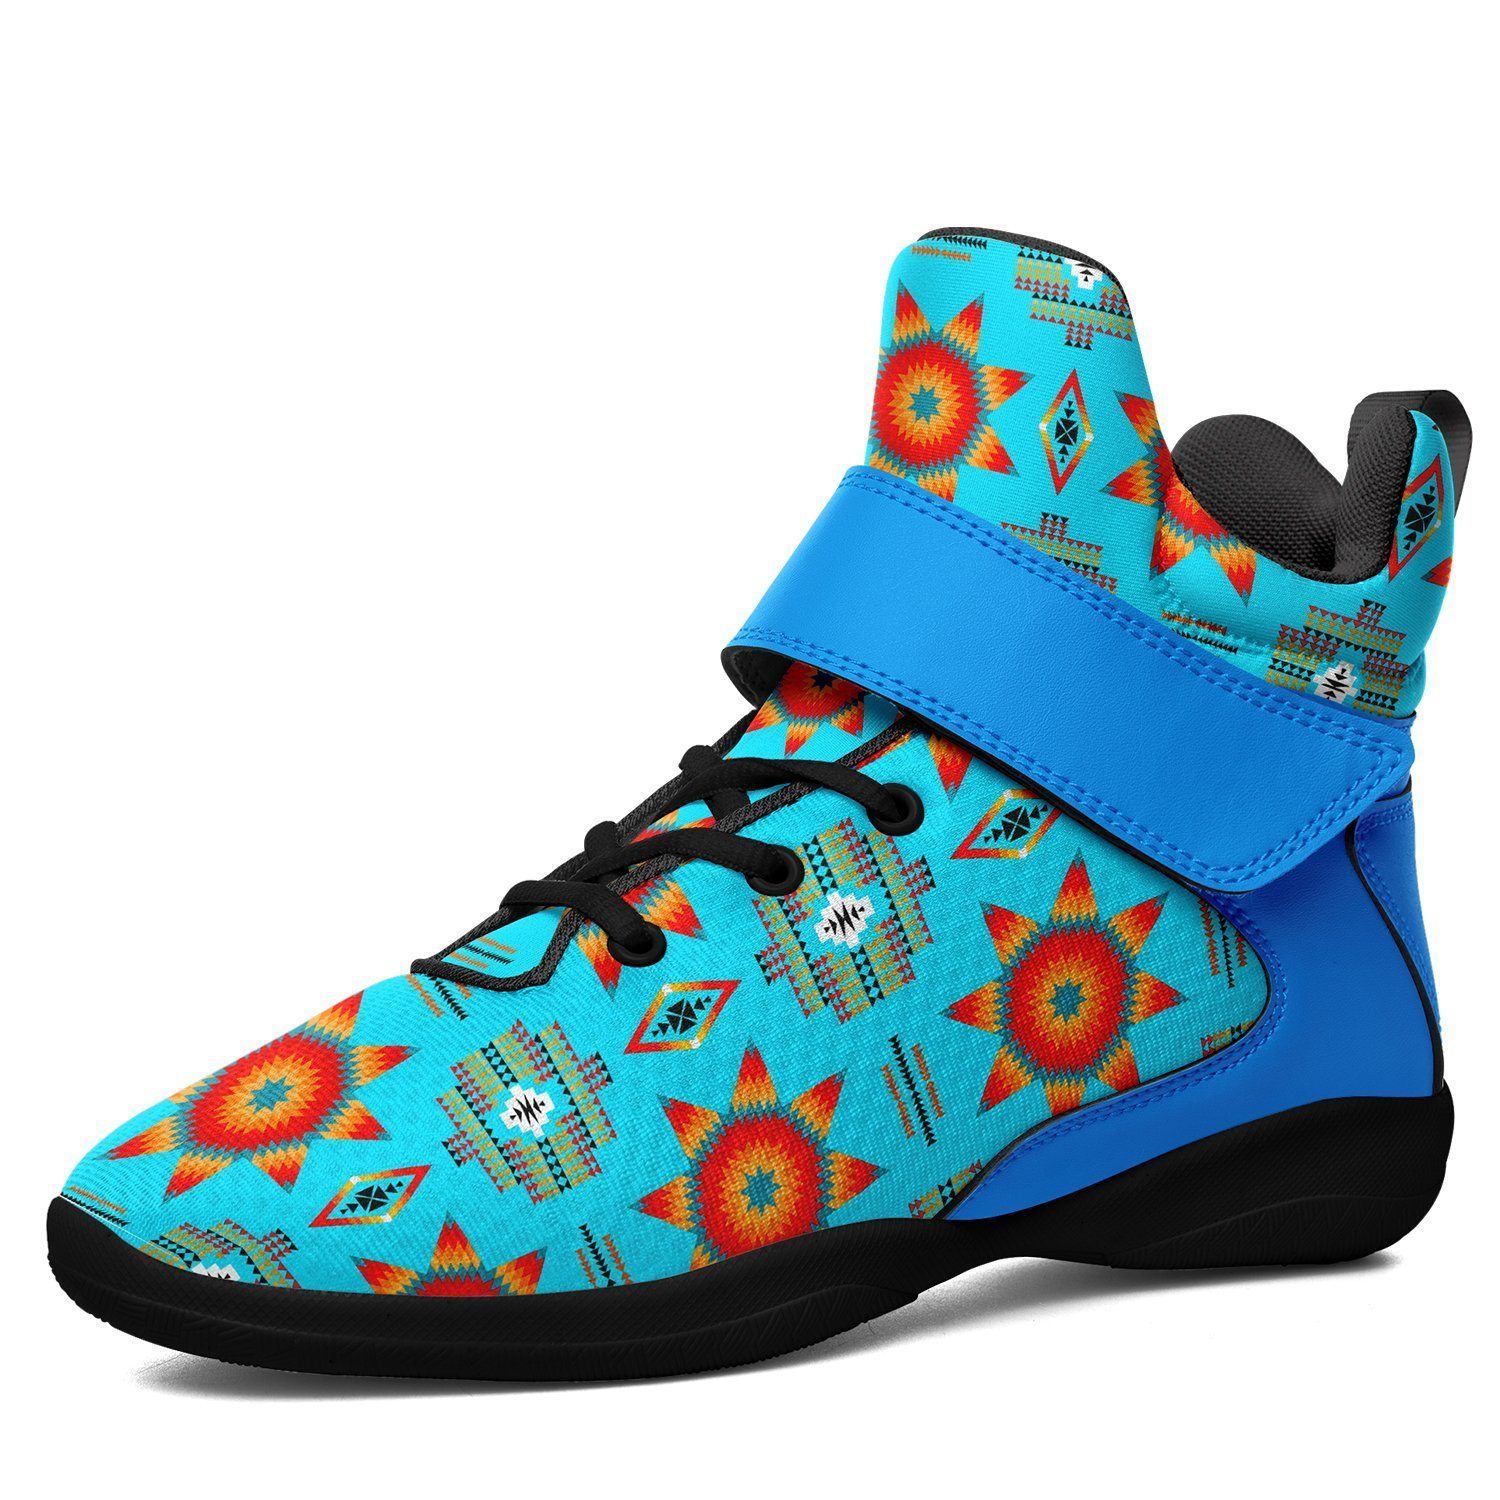 Rising Star Harvest Moon Ipottaa Basketball / Sport High Top Shoes - Black Sole 49 Dzine US Men 7 / EUR 40 Black Sole with Light Blue Strap 